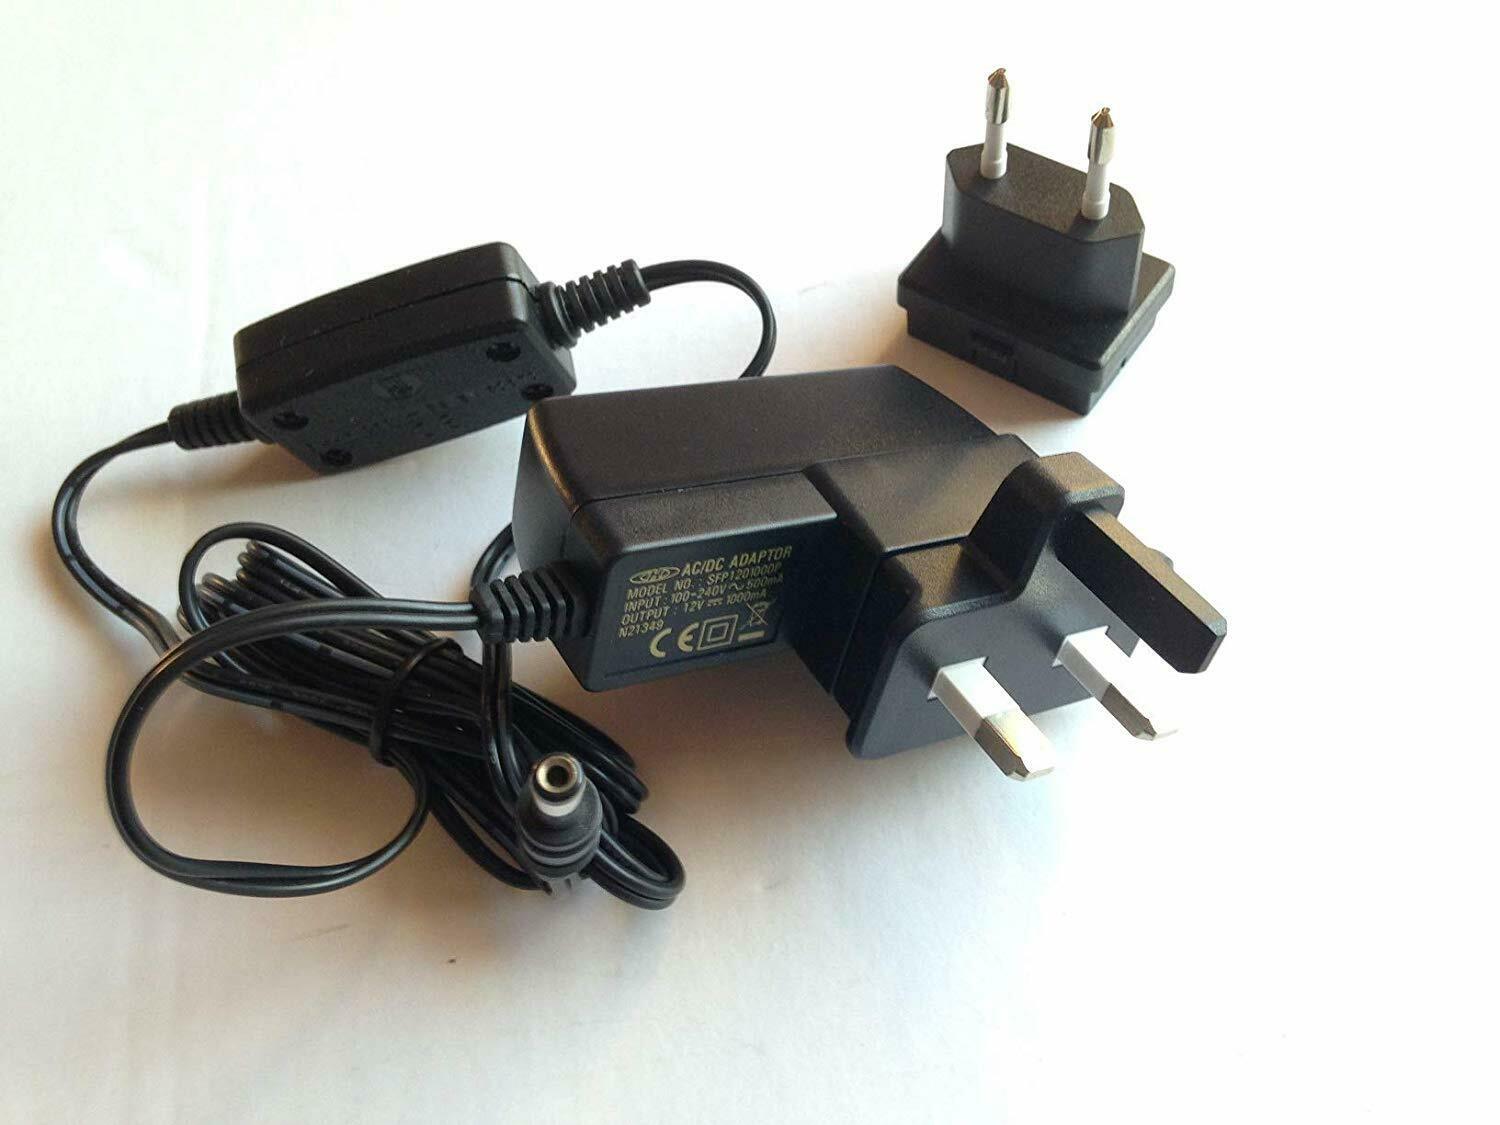 12V 1A/ 1000MA Power Supply Adapter, 5.5MM x 2.1MM Tip 12V 1AMPS Power Adapter 12V 1A/ 1000MA Power Supply Adapter, 5.